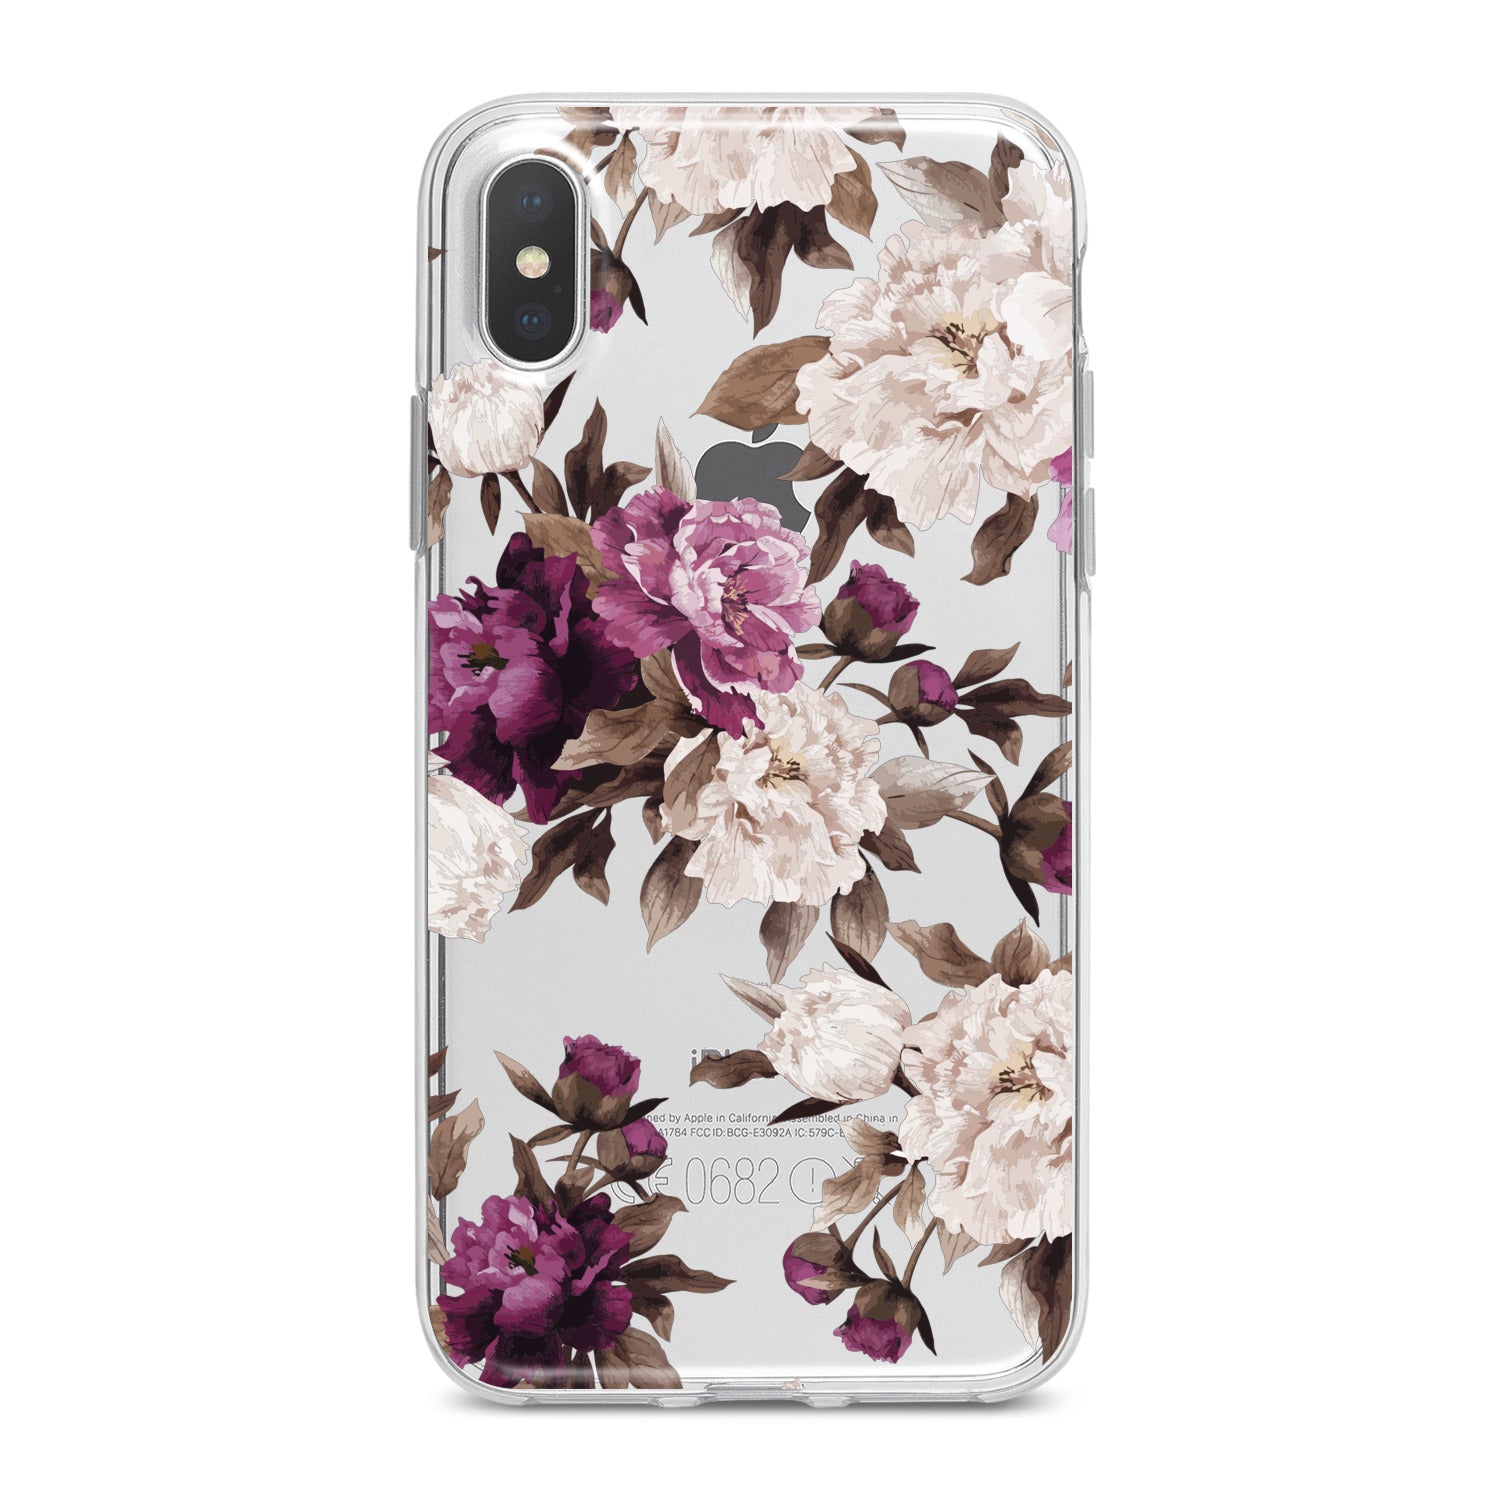 Lex Altern Beautiful Garden Blossom Phone Case for your iPhone & Android phone.